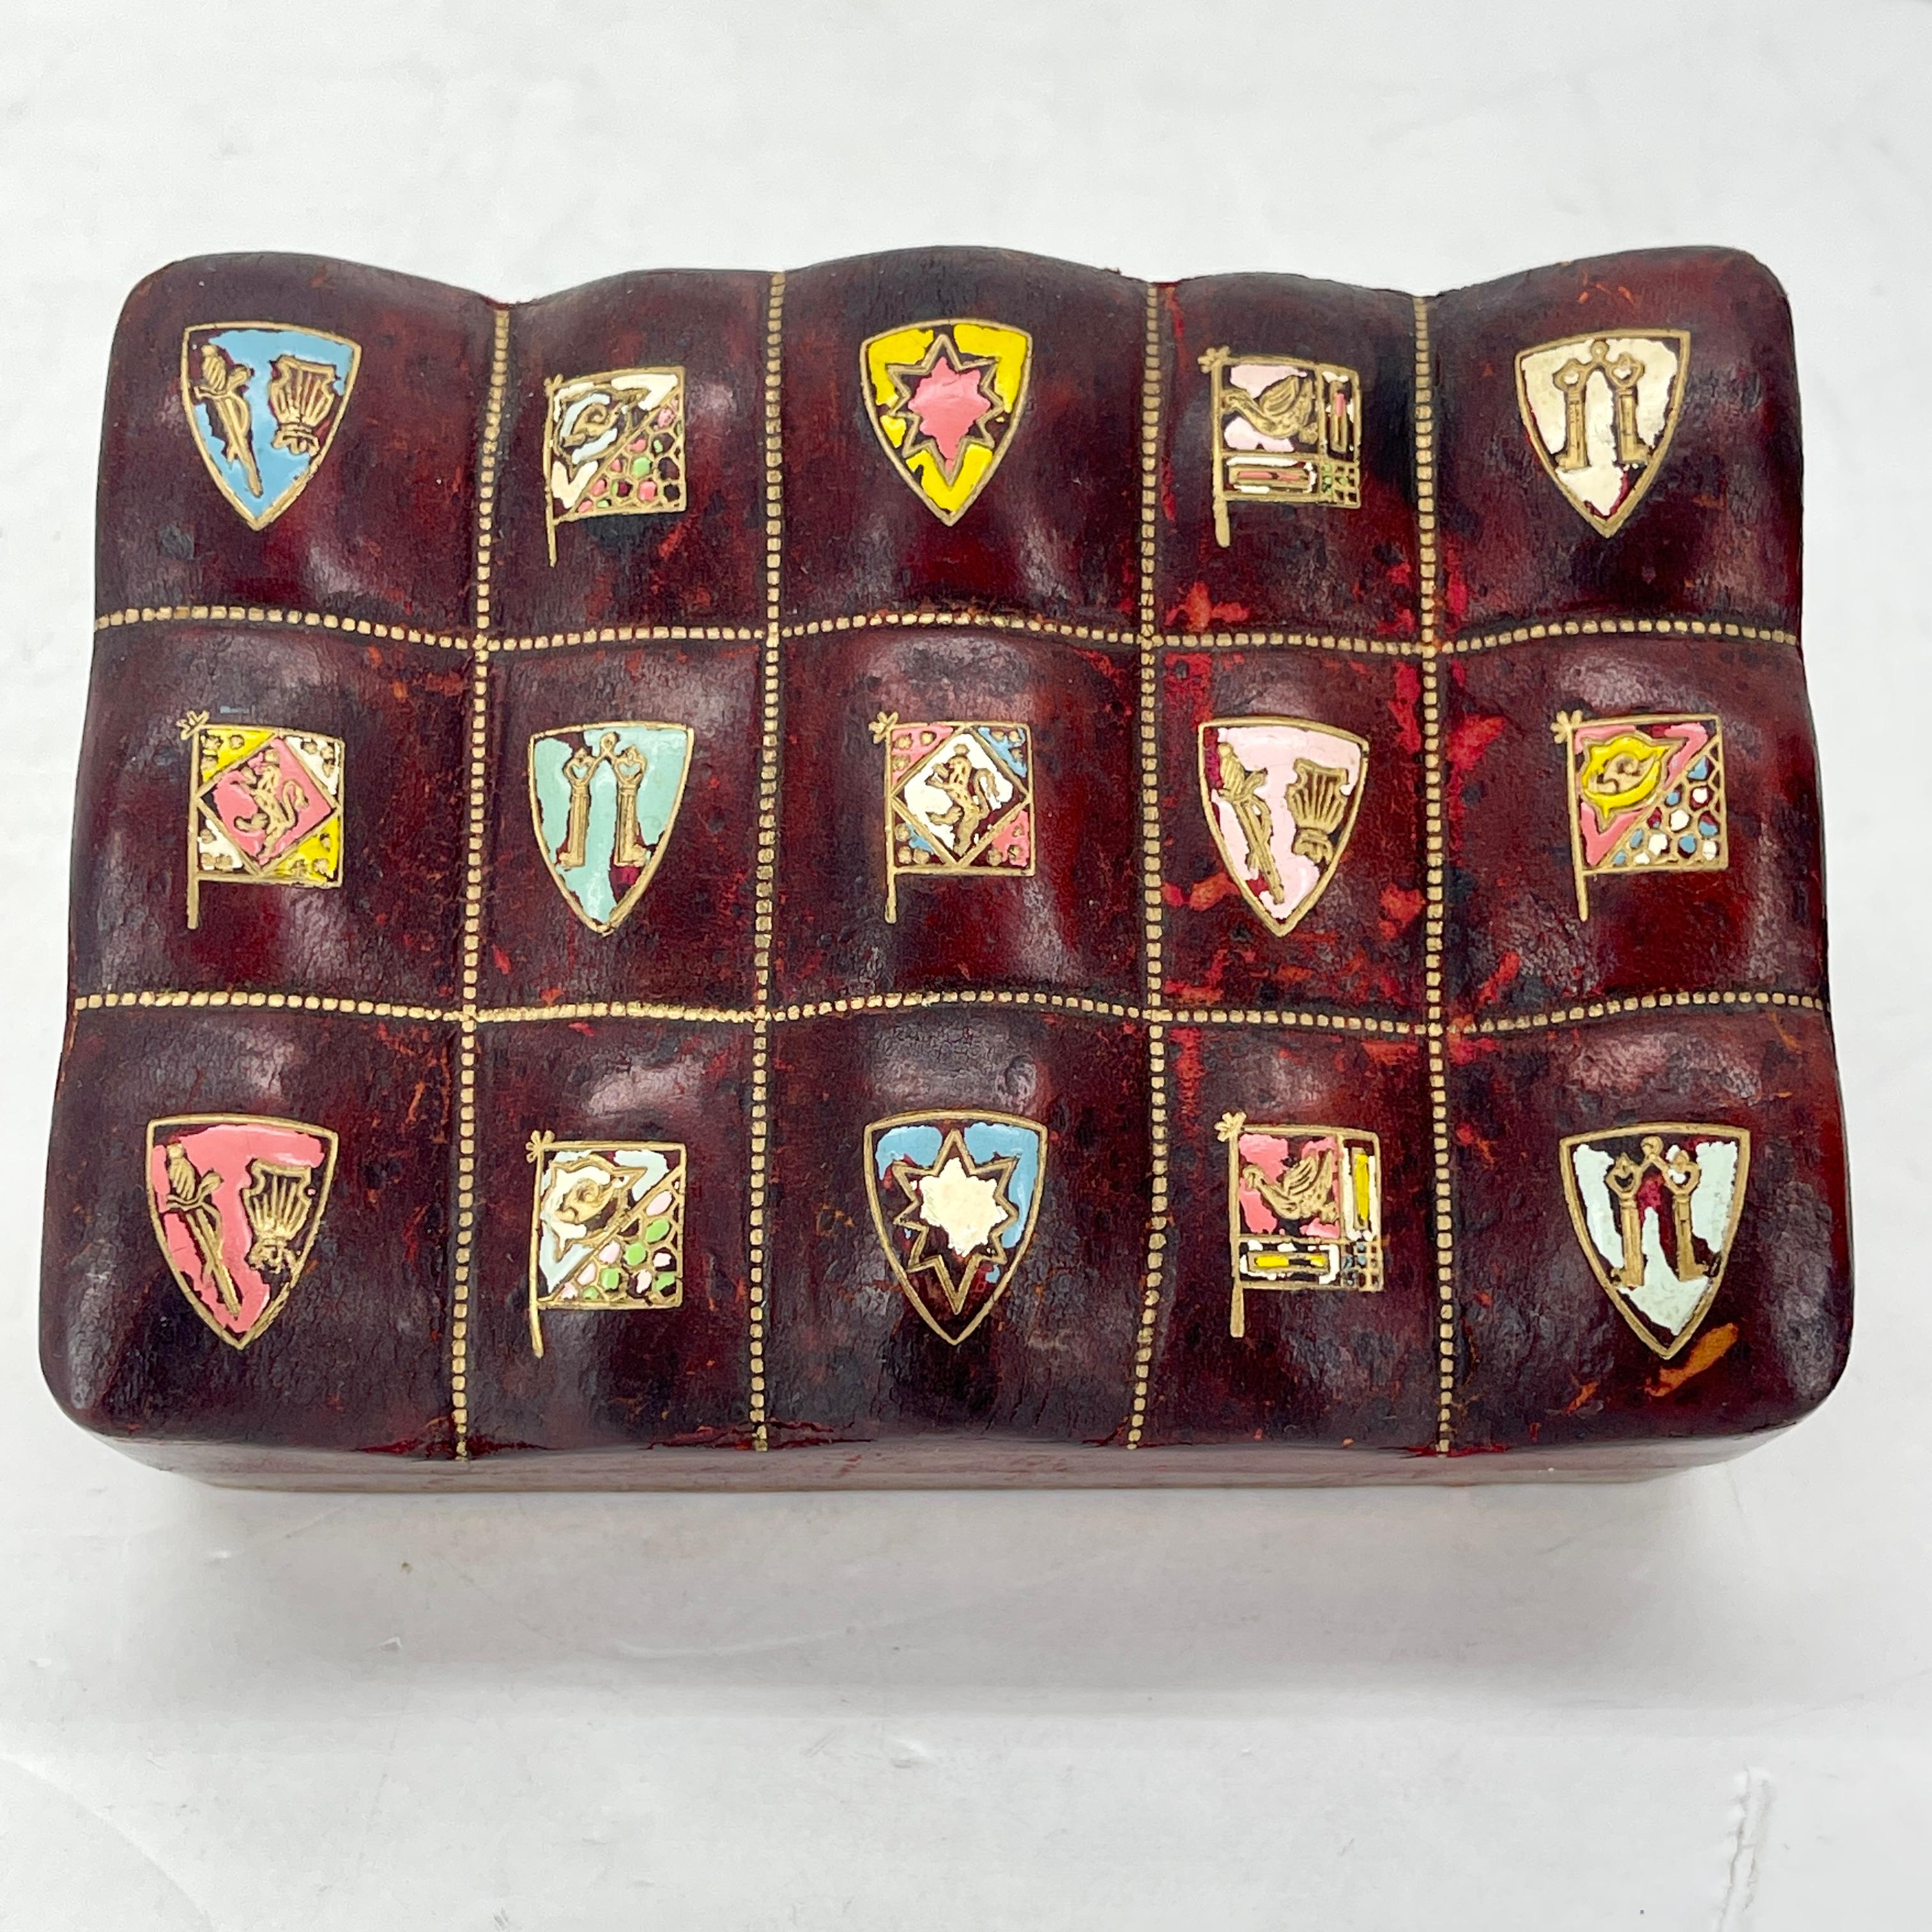 Amazing Rectangular Burgundy leather jewelry box with gold Embossing and Bevelled Lei With Multiple Code of Arms. Signed / Marked Made in Italy and Genuine Leather.